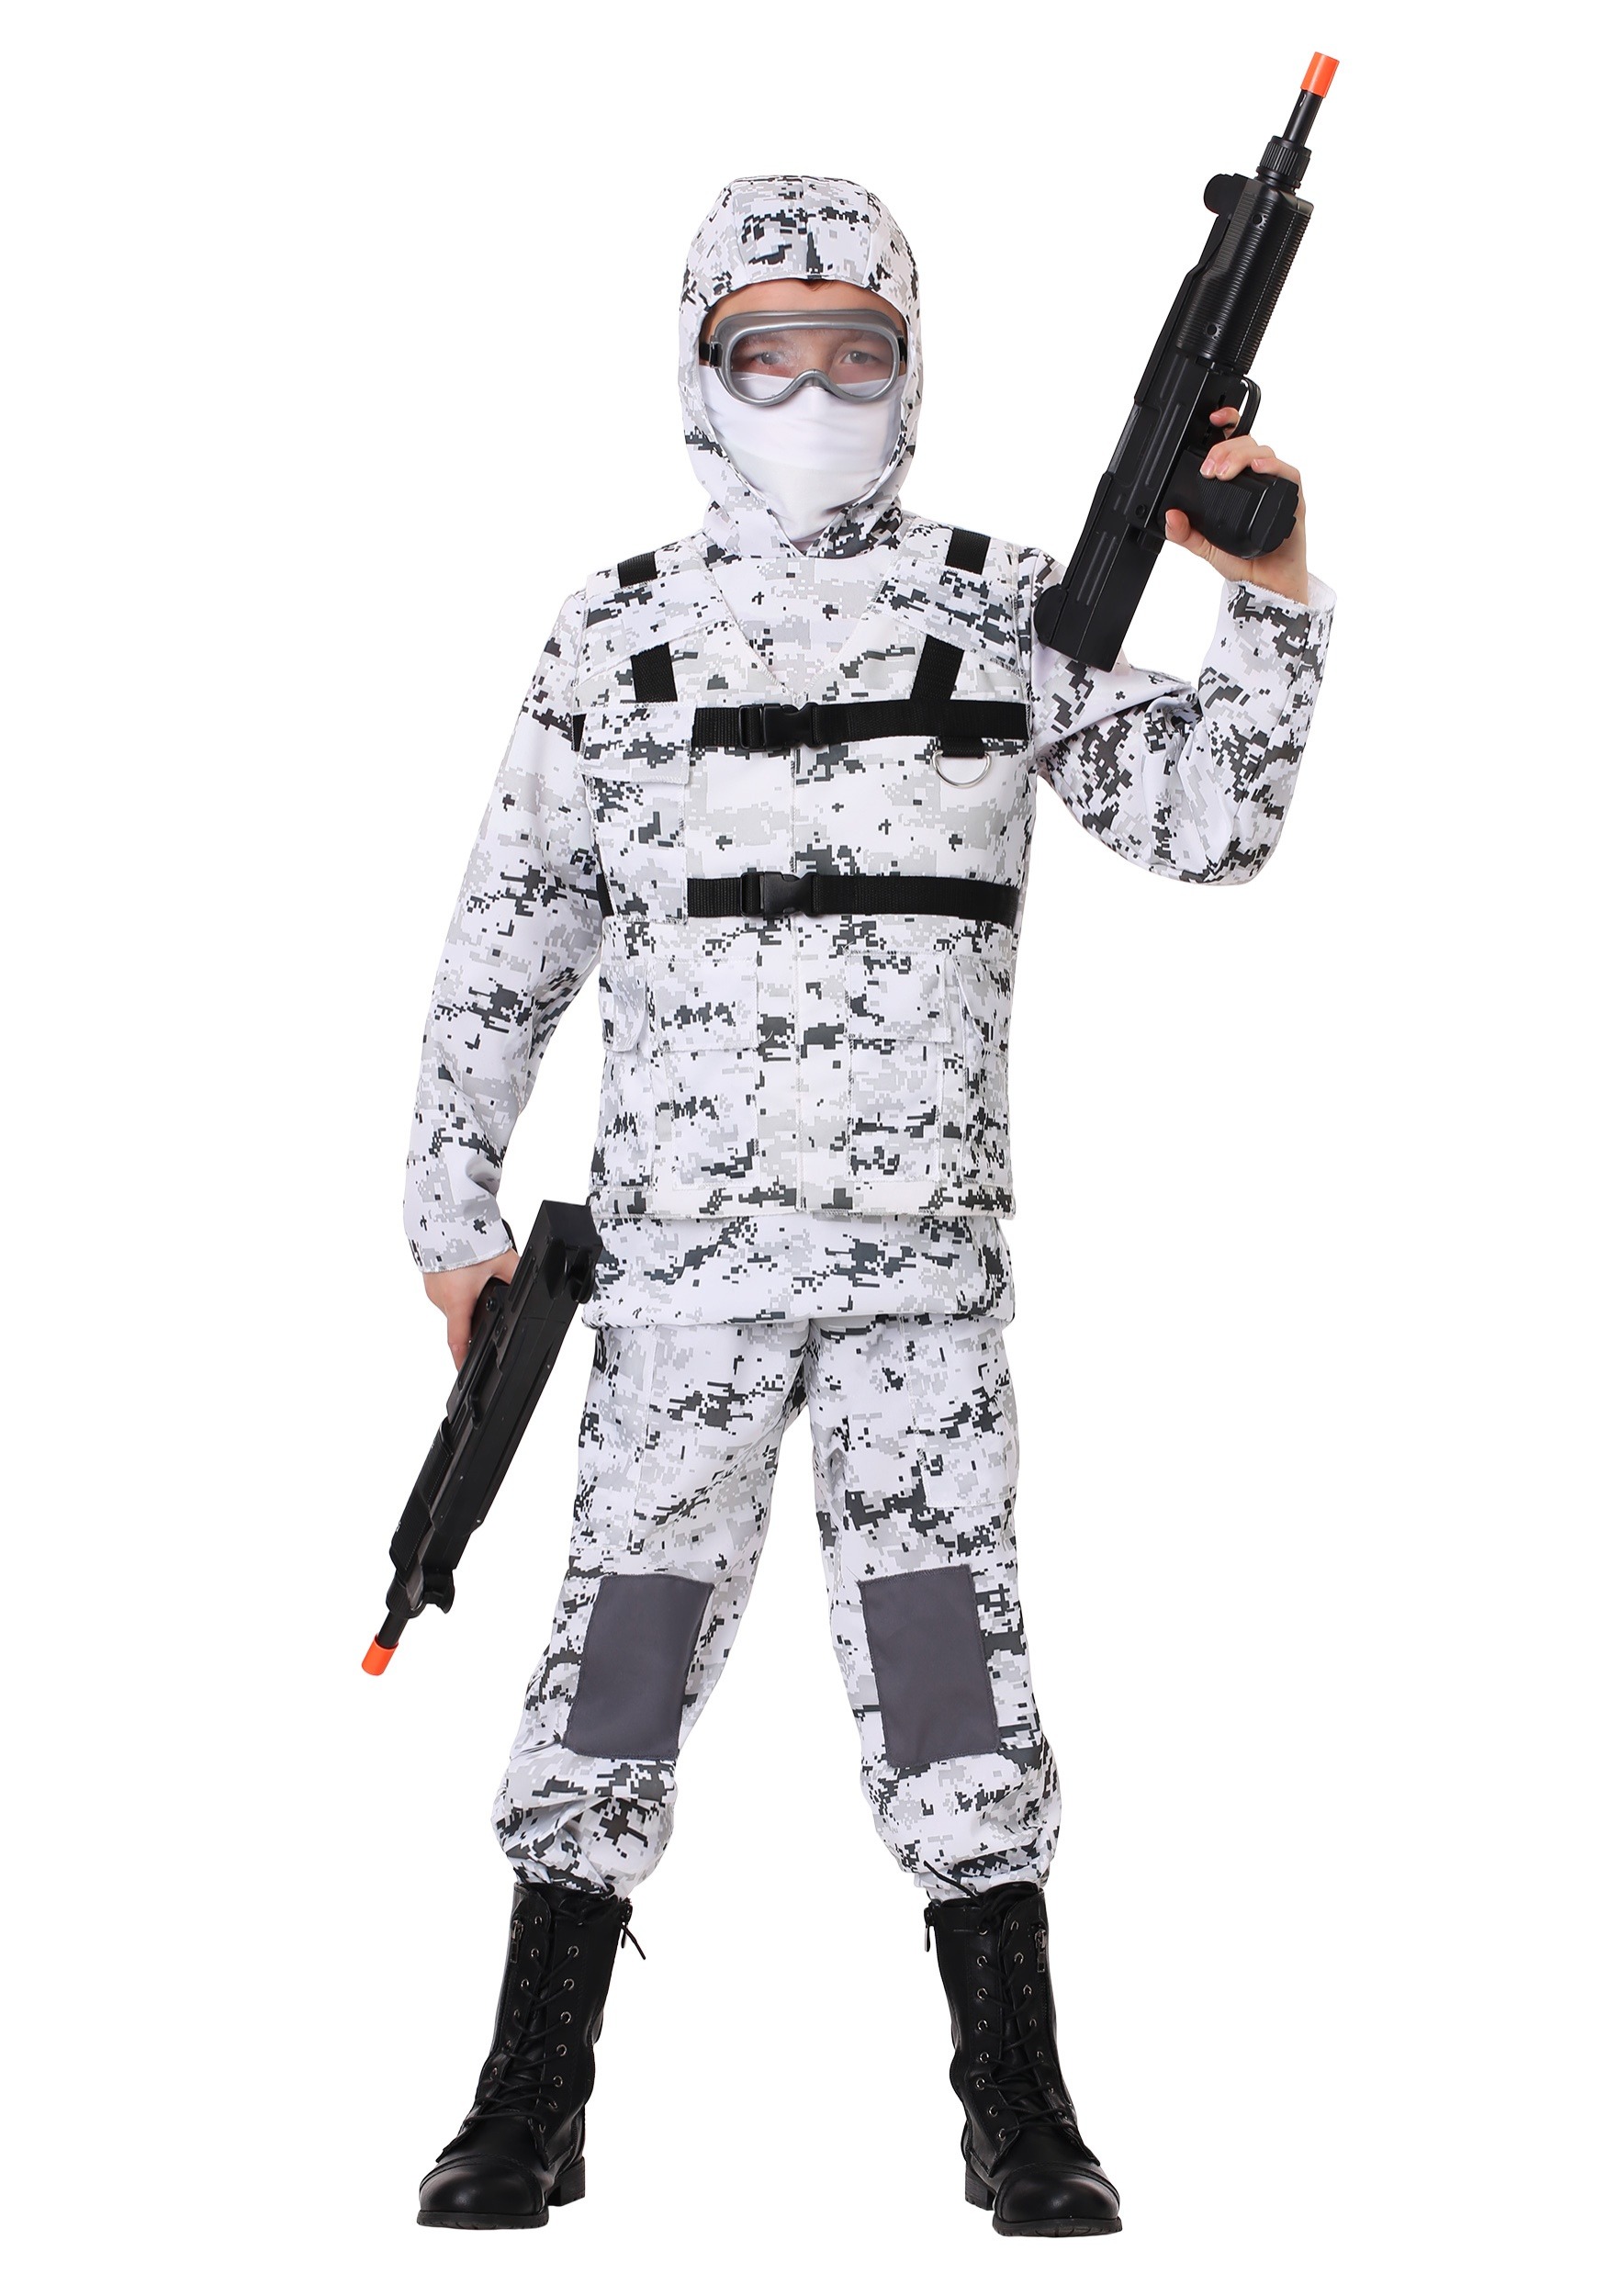 Soldier Halloween Costumes For Boys